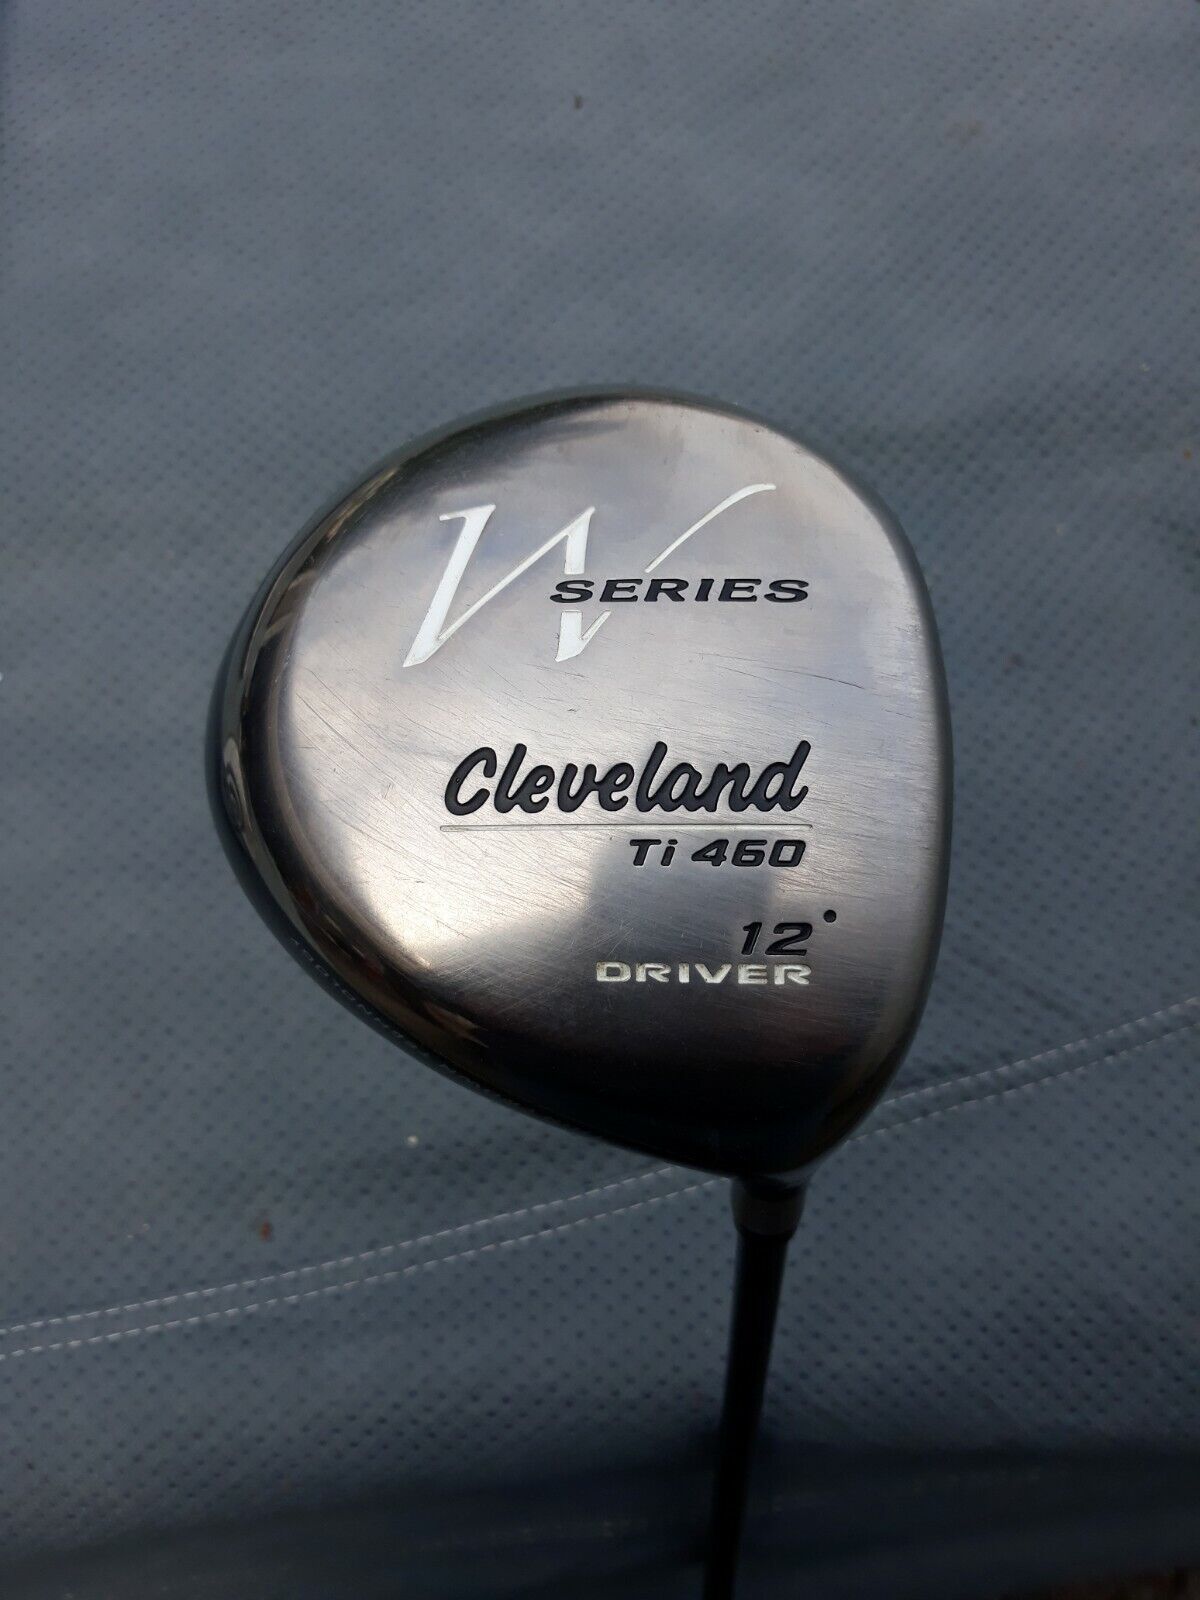 Cleveland Ti460. W Series. 12in Driver Right-handed With cover. 